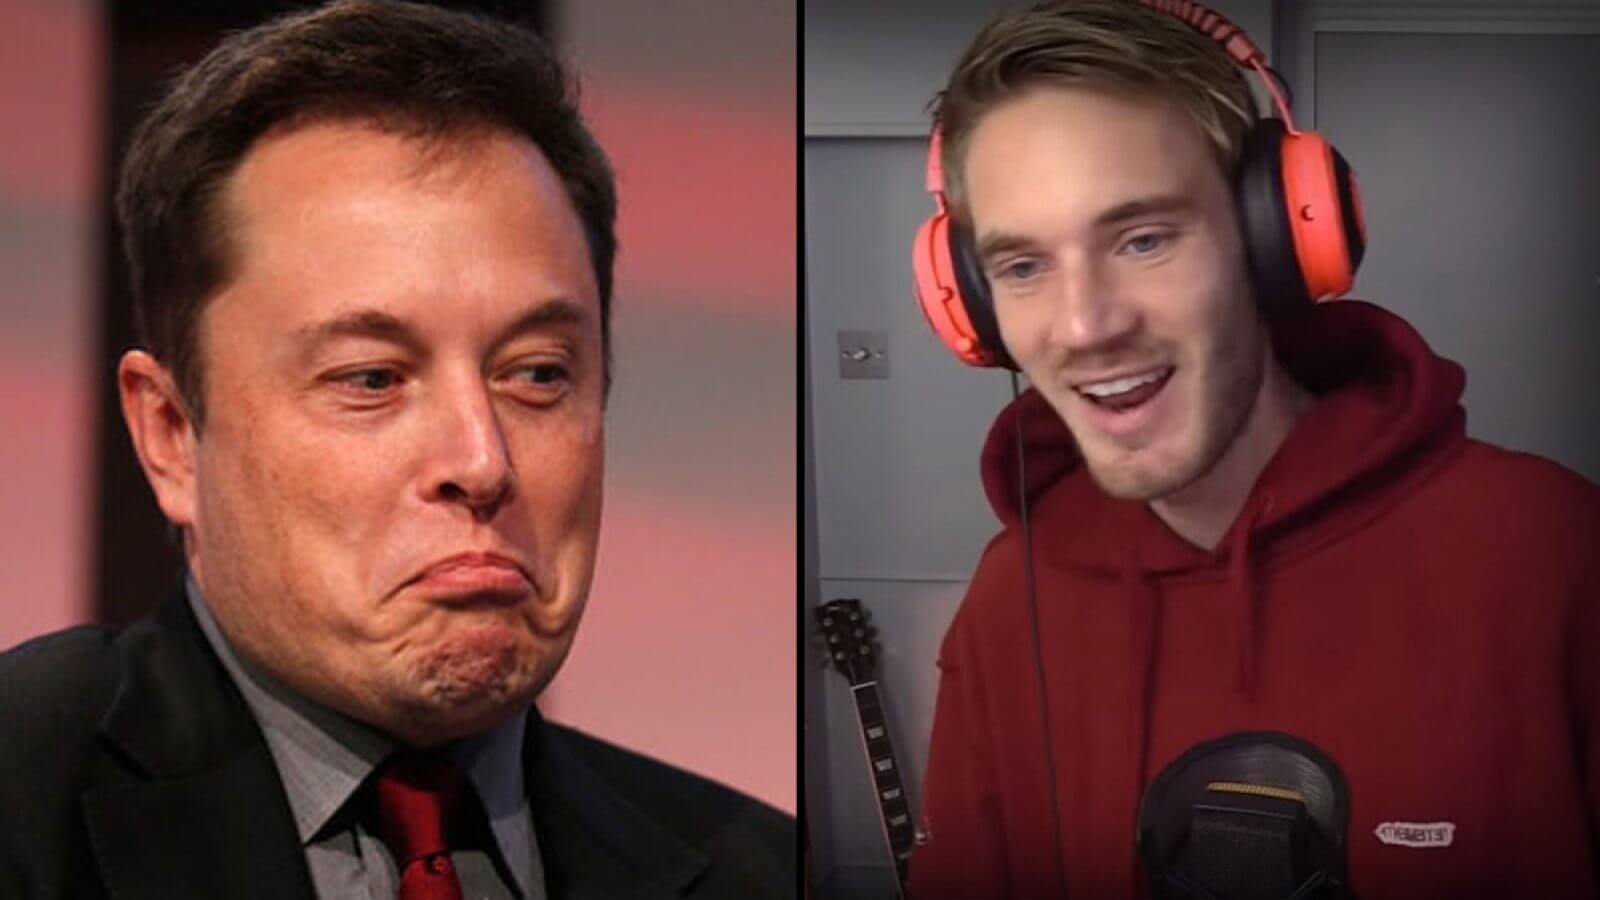 Elon-Musk-tweets-that-hes-hosted-Meme-Review-Has-he-saved-PewDiePie